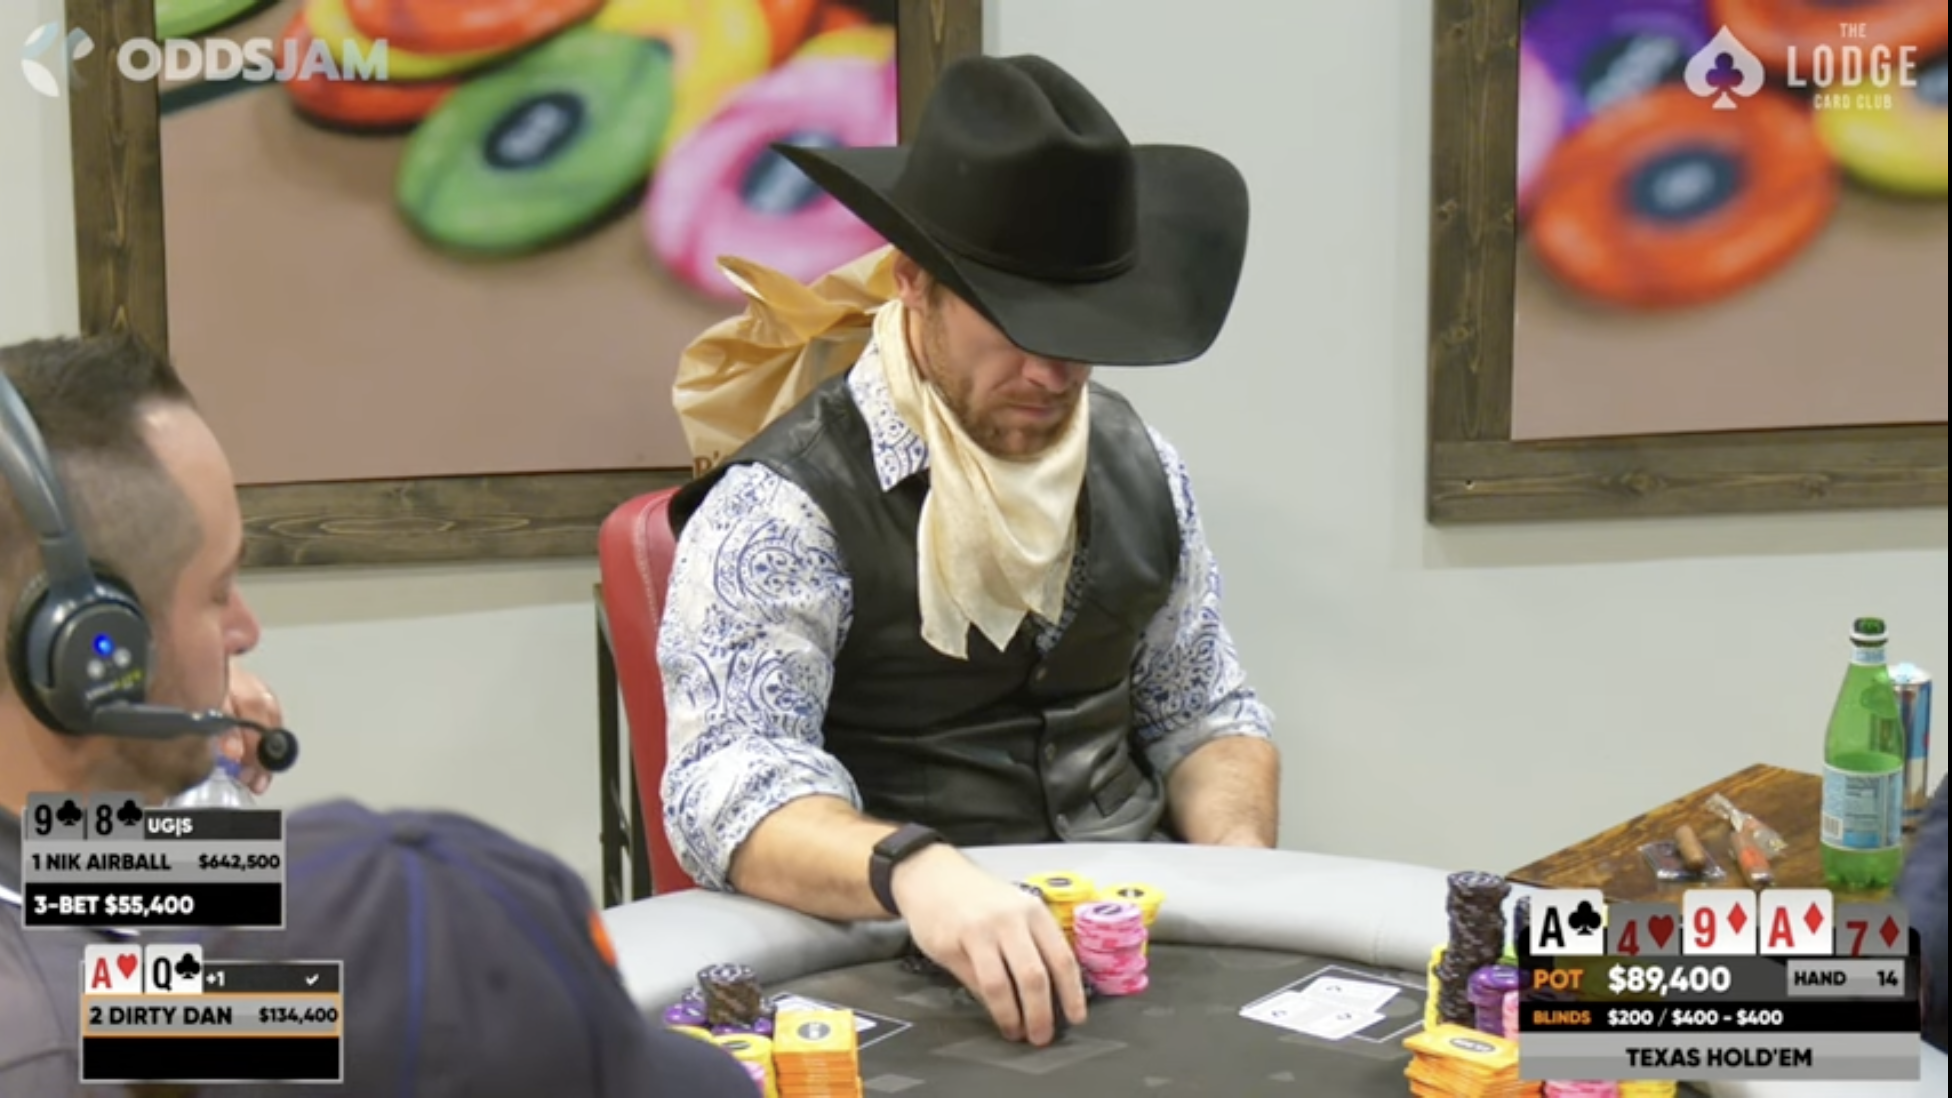 Sore Loser at The Lodge: Poker Champ ‘Dirty’ Dan Cates Invades Airball’s Space